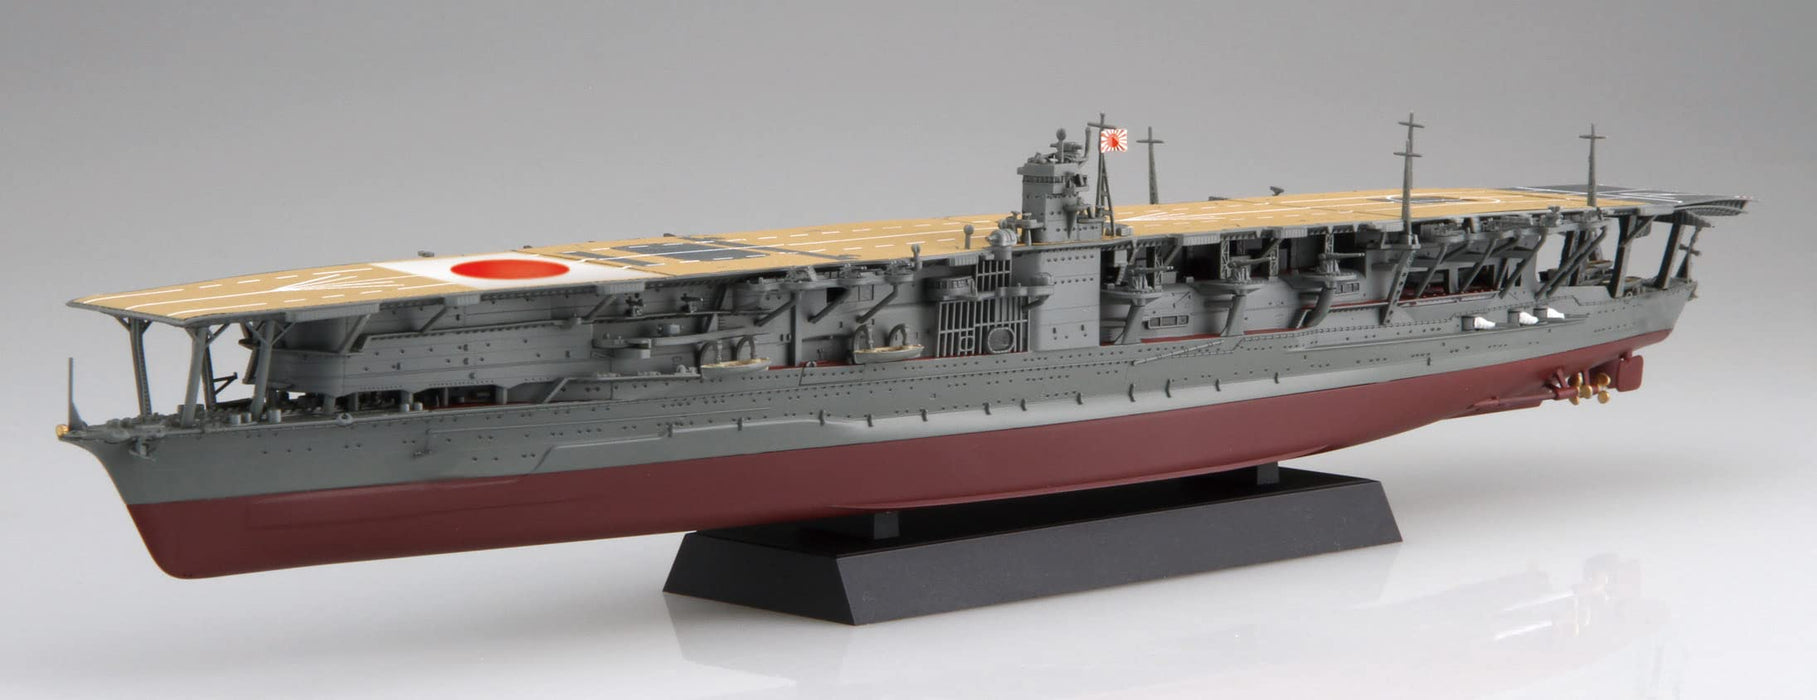 FUJIMI Fune Next 1/700 Japanese Navy Aircraft Carrier Akagi Special Edition Battle Of Midway In 1945 Plastic Model